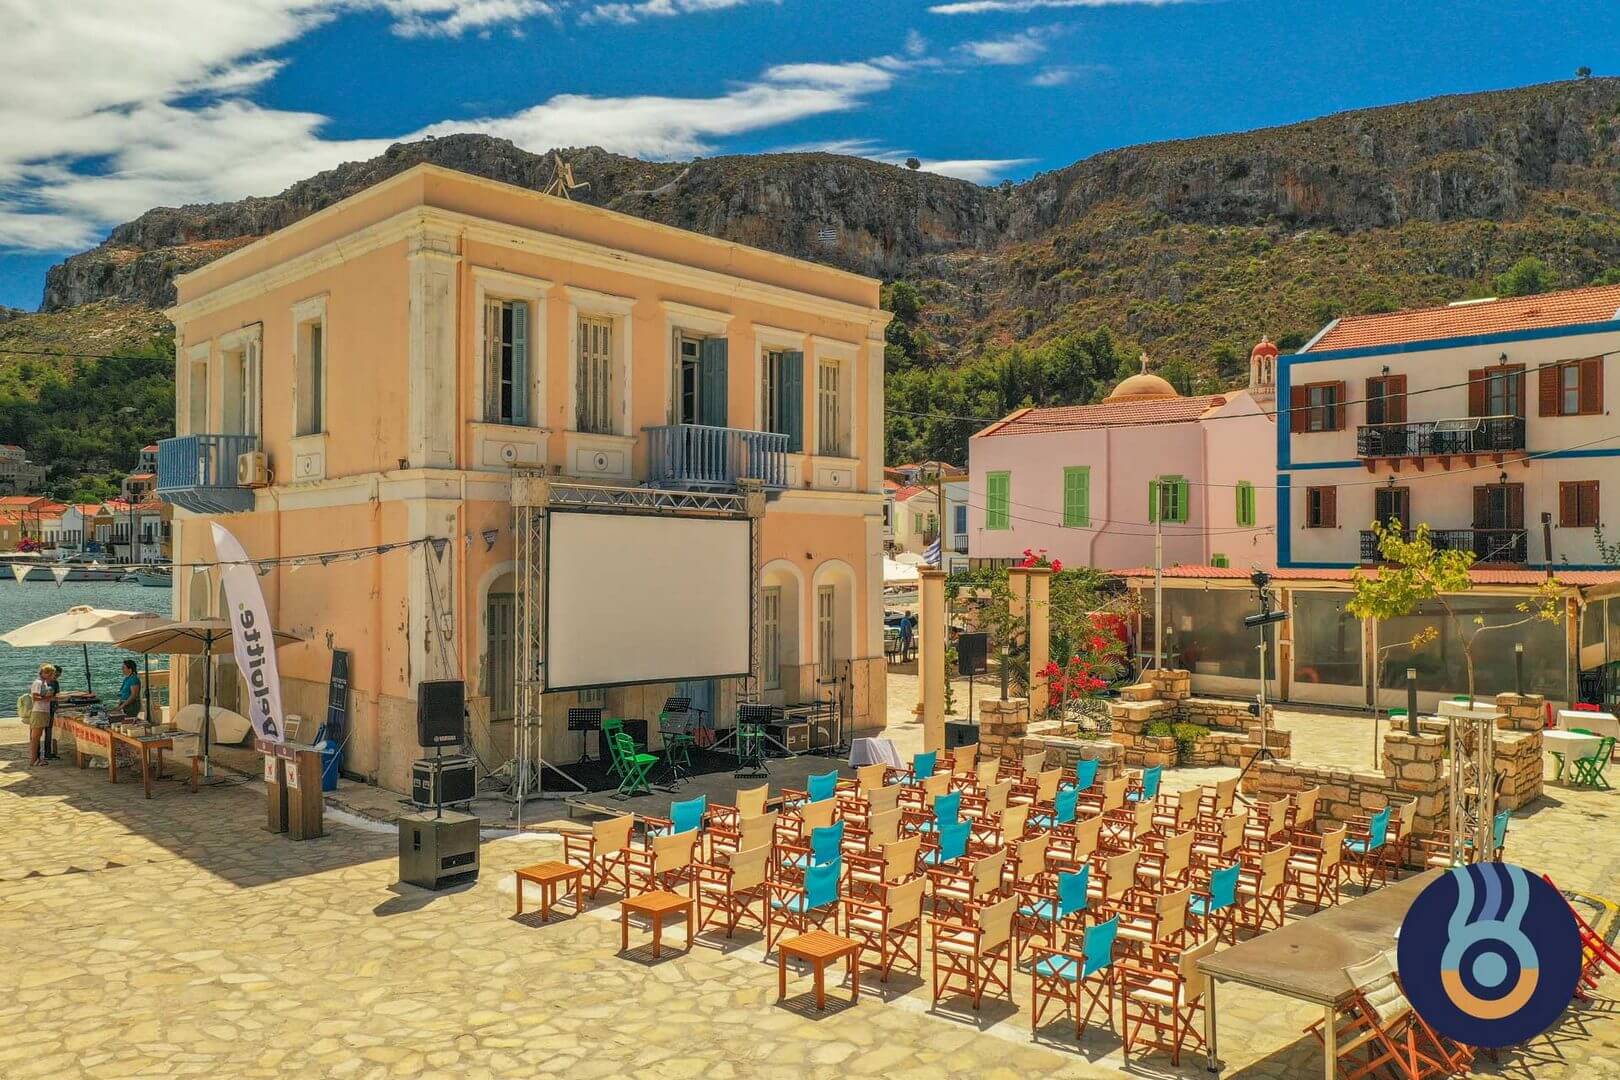 Beyond Borders: the Kastellorizo International Documentary Festival comes with 42 films.